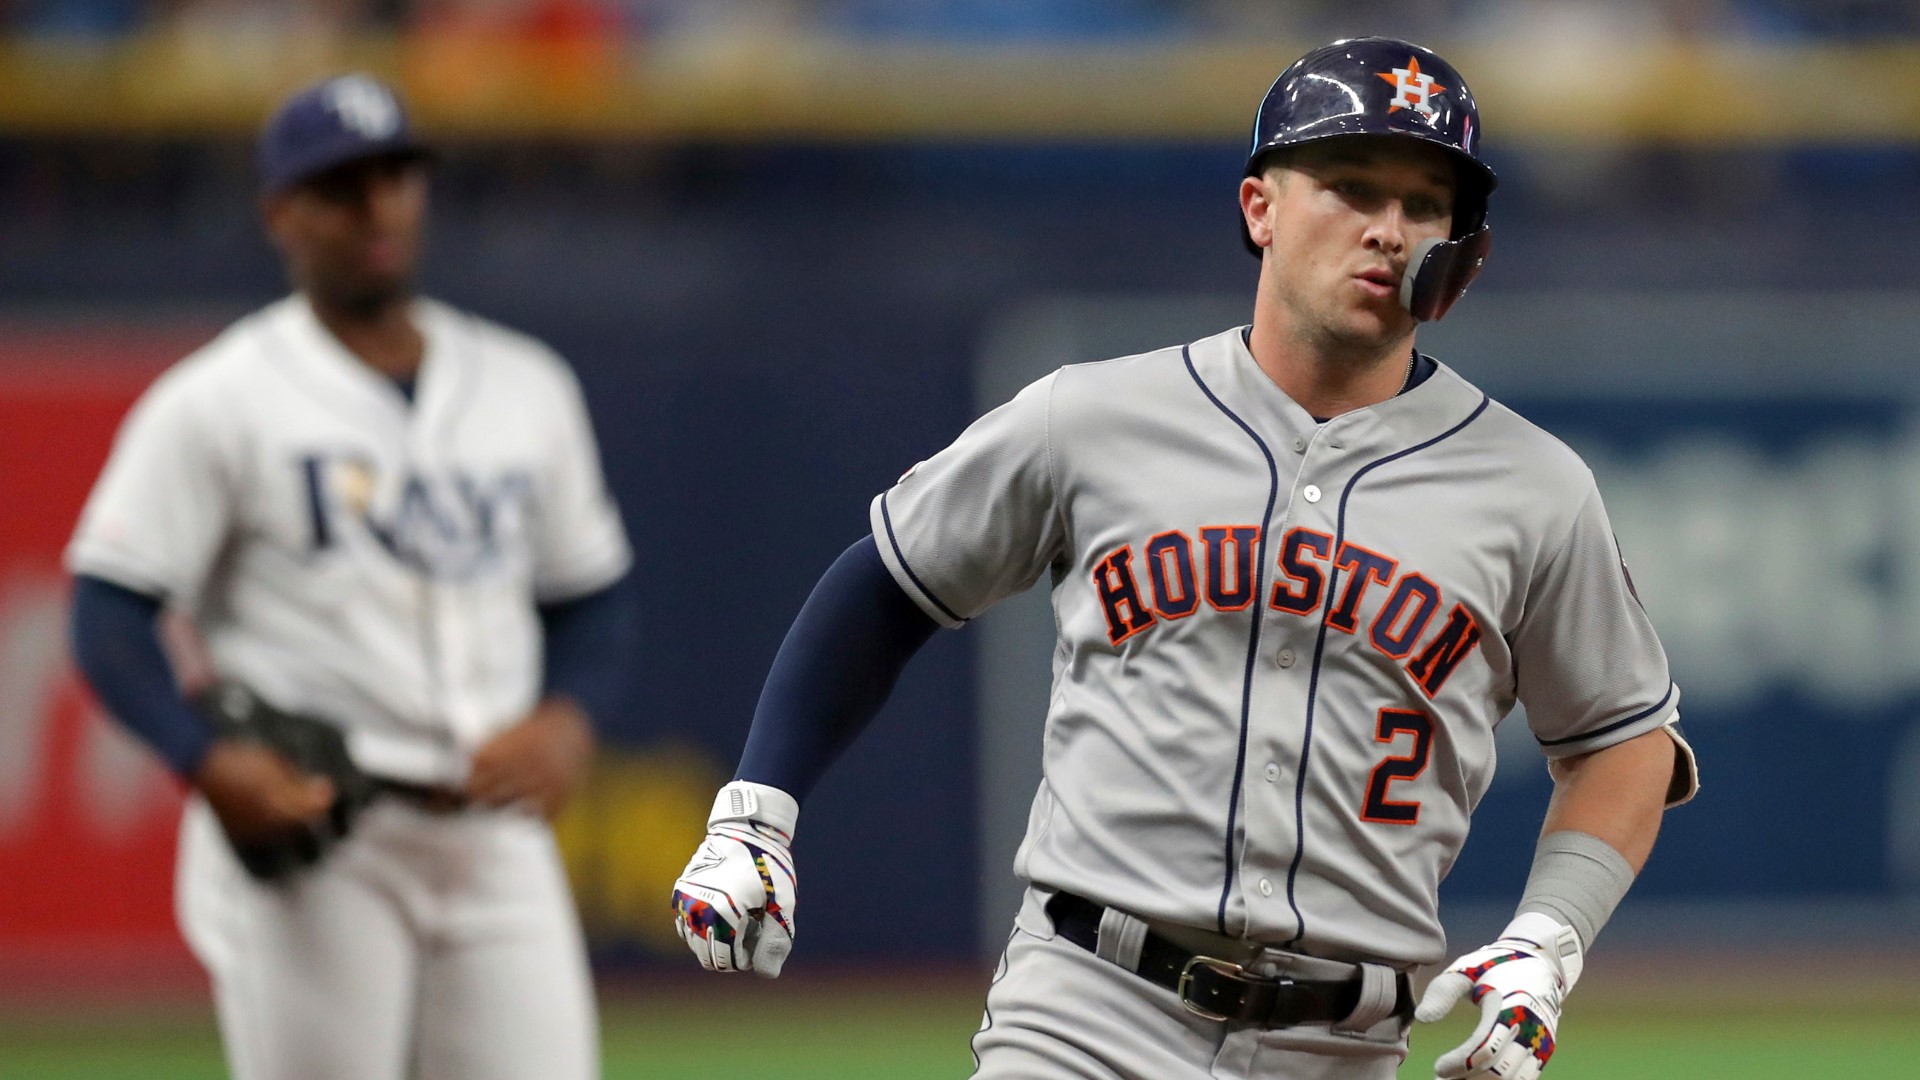 KHOU 11 Baseball Analyst Jeremy Booth has two reasons why the Astros should be scared of the Rays — and three reasons why the Astros will win the ALDS.